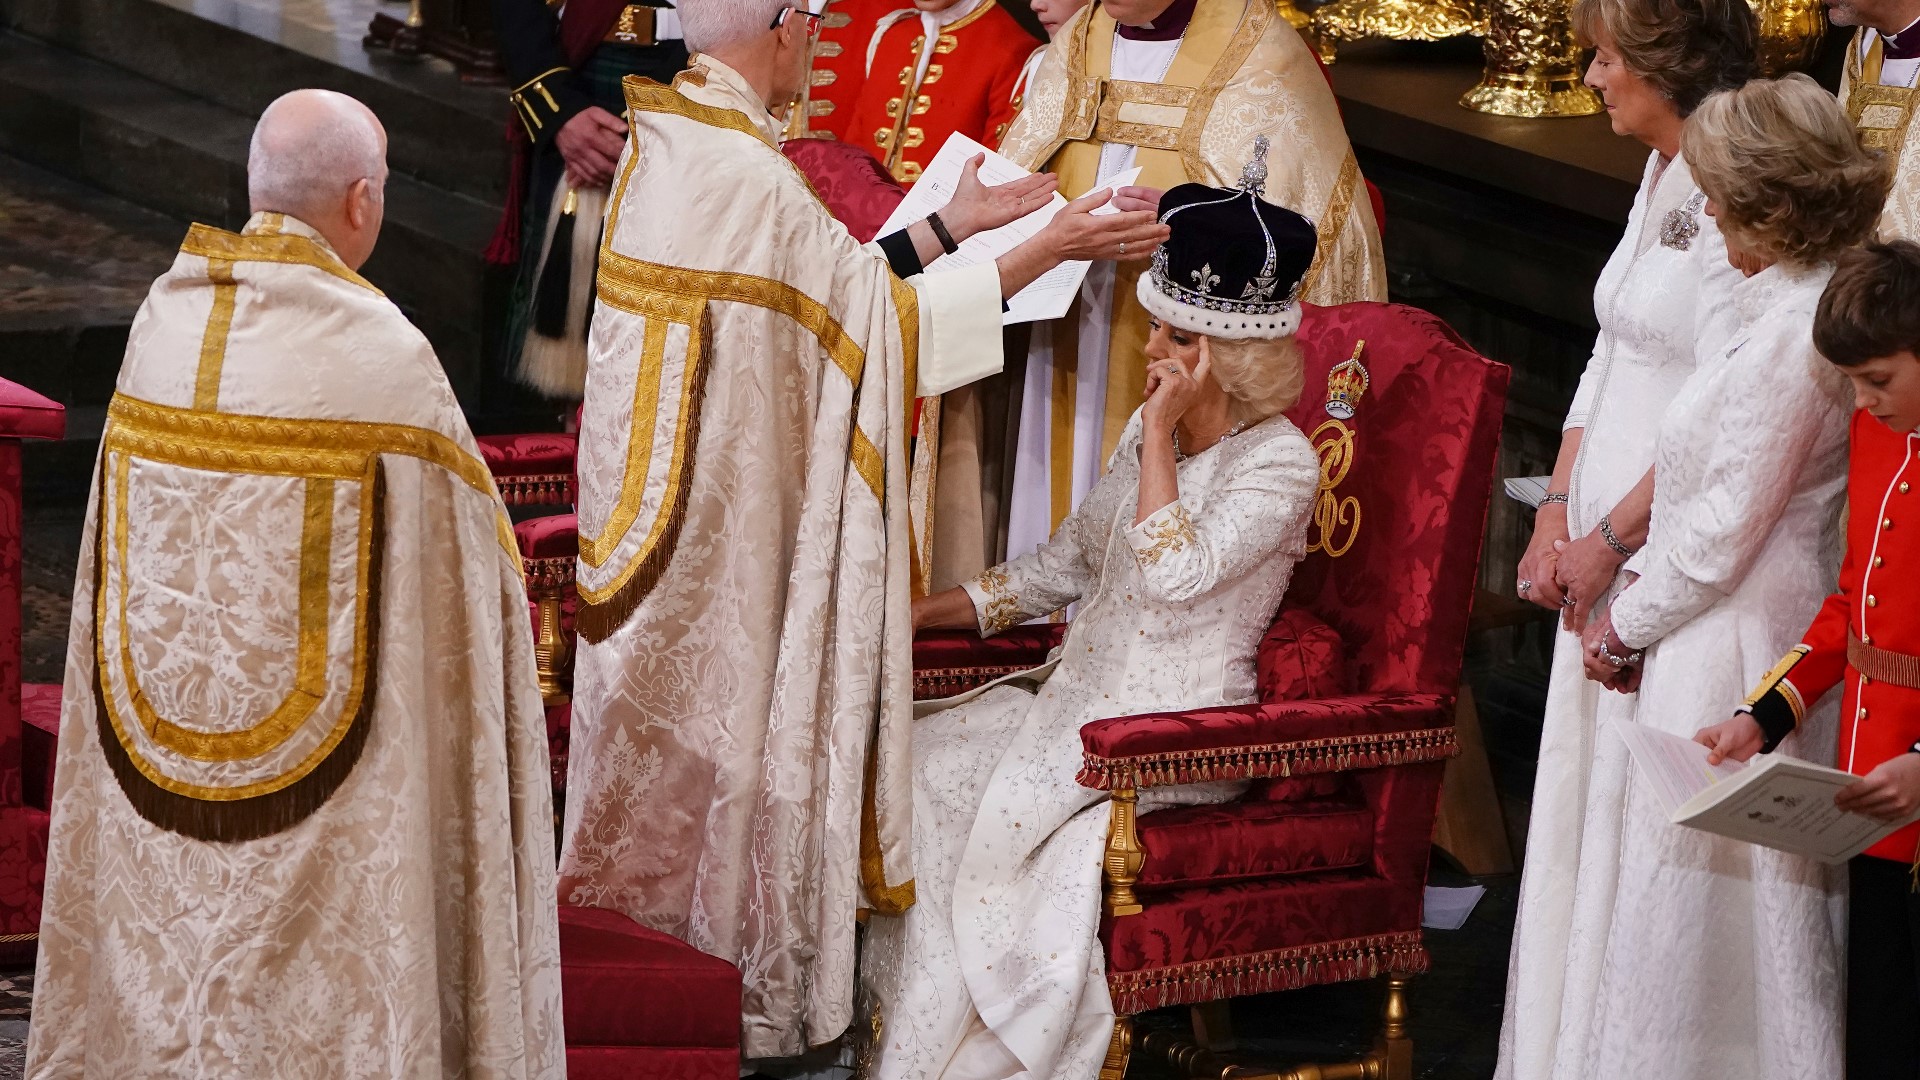 Camilla, the queen consort, has been anointed and crowned with Queen Mary’s Crown.